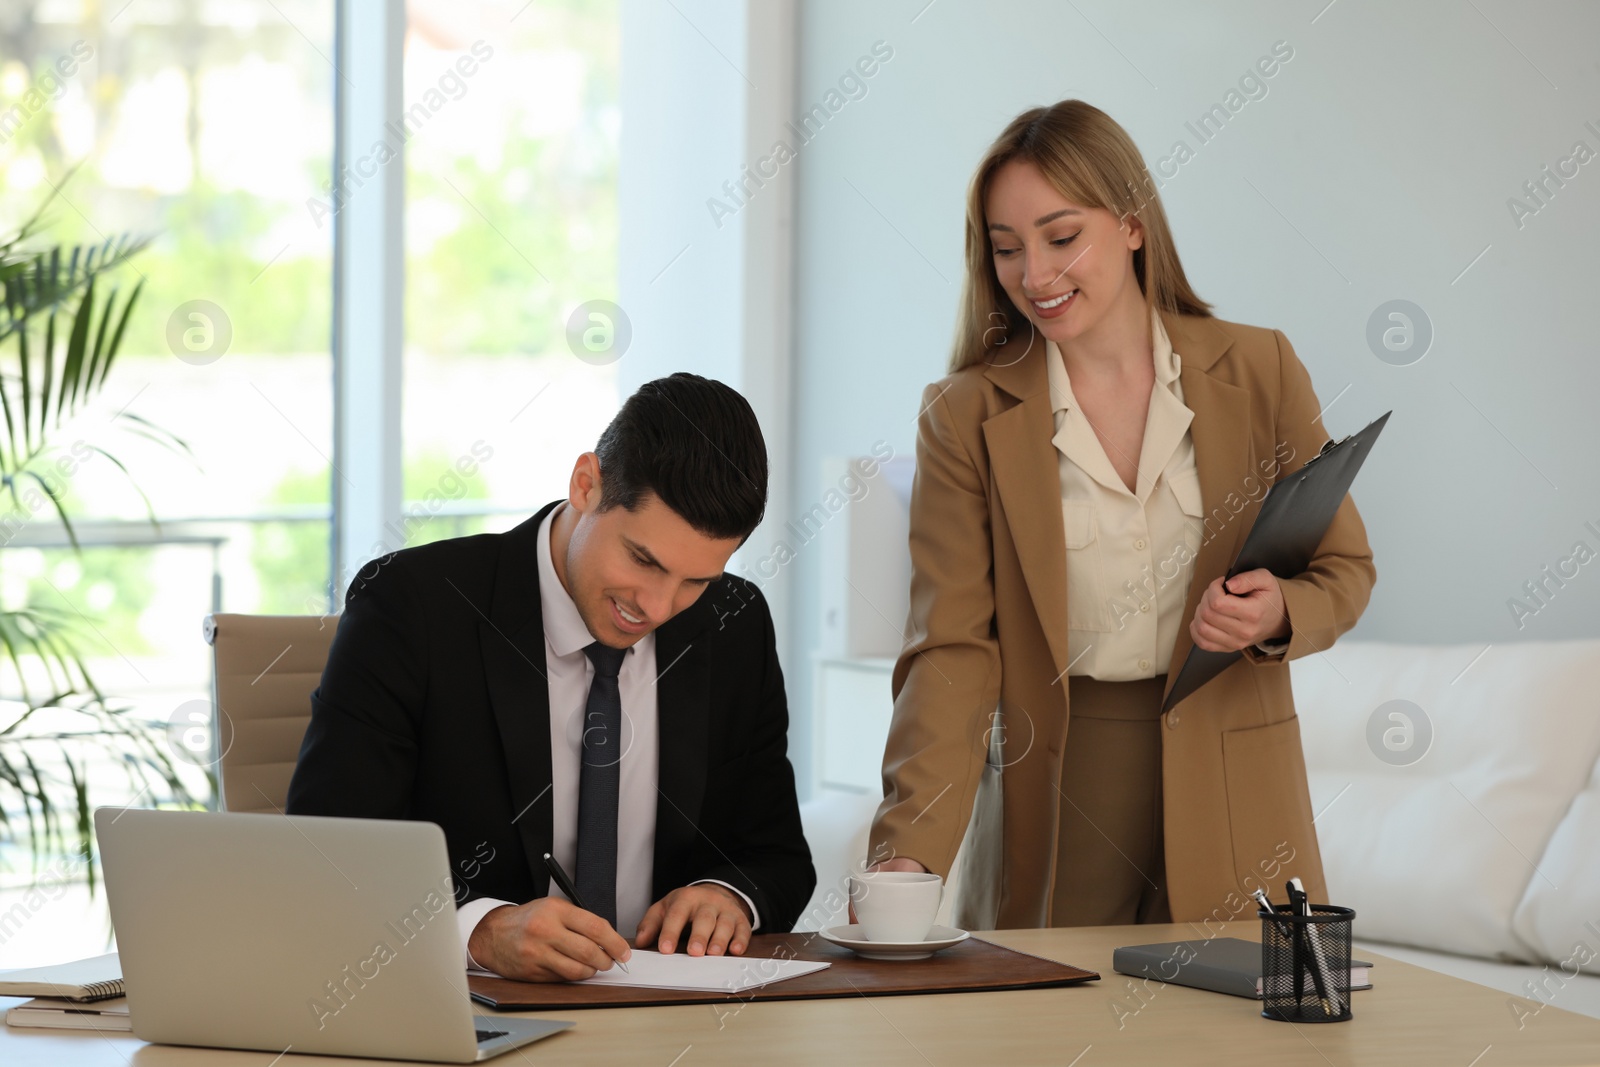 Photo of Secretary bringing coffee to her boss in office